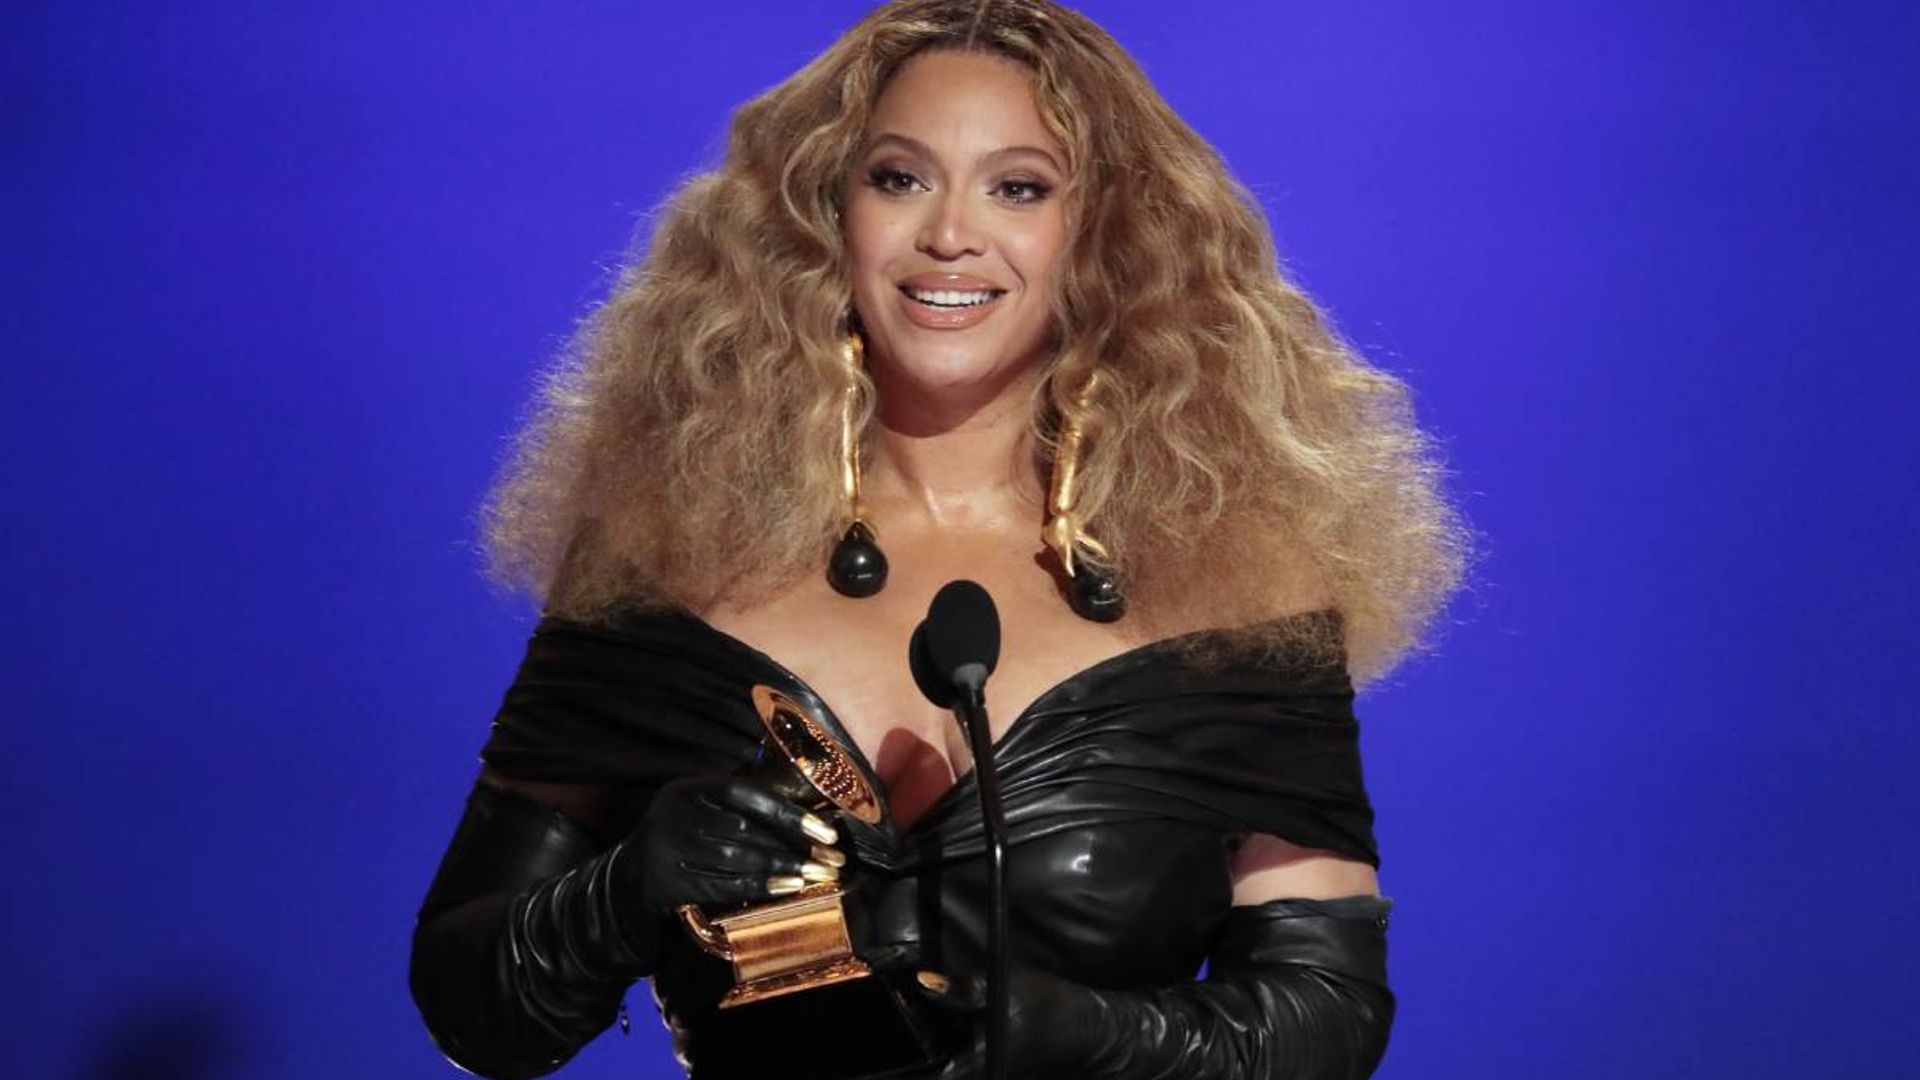 Beyoncé shows off major leg in a showstopping black dress | HELLO!